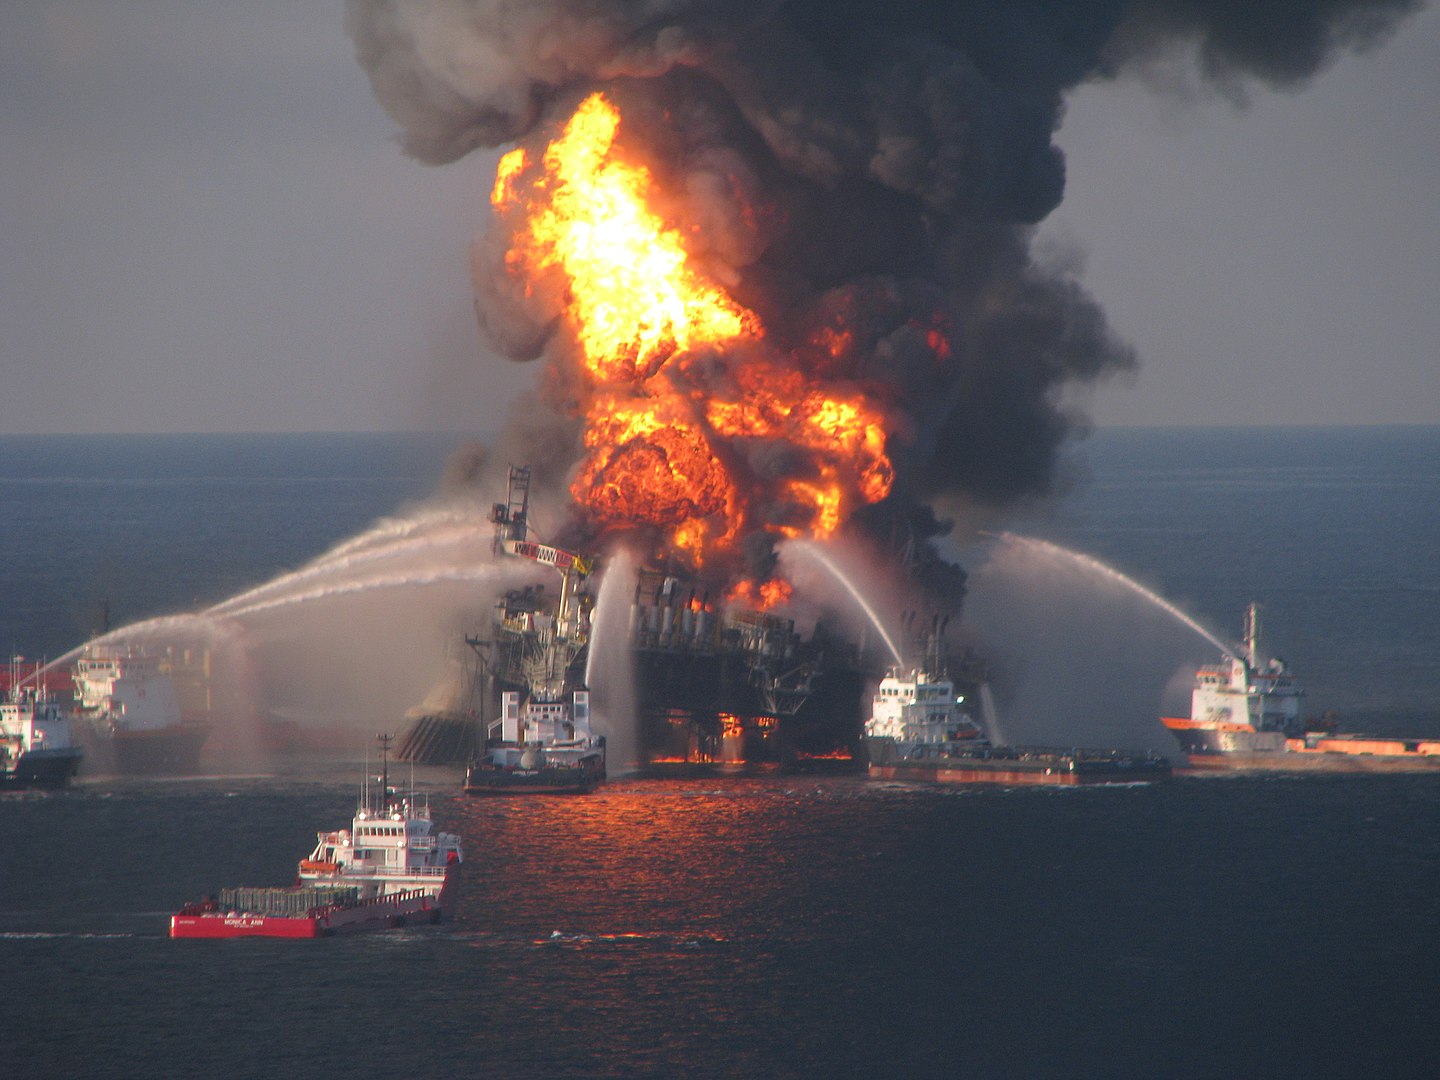 oil rig on fire with boats spraying water on it